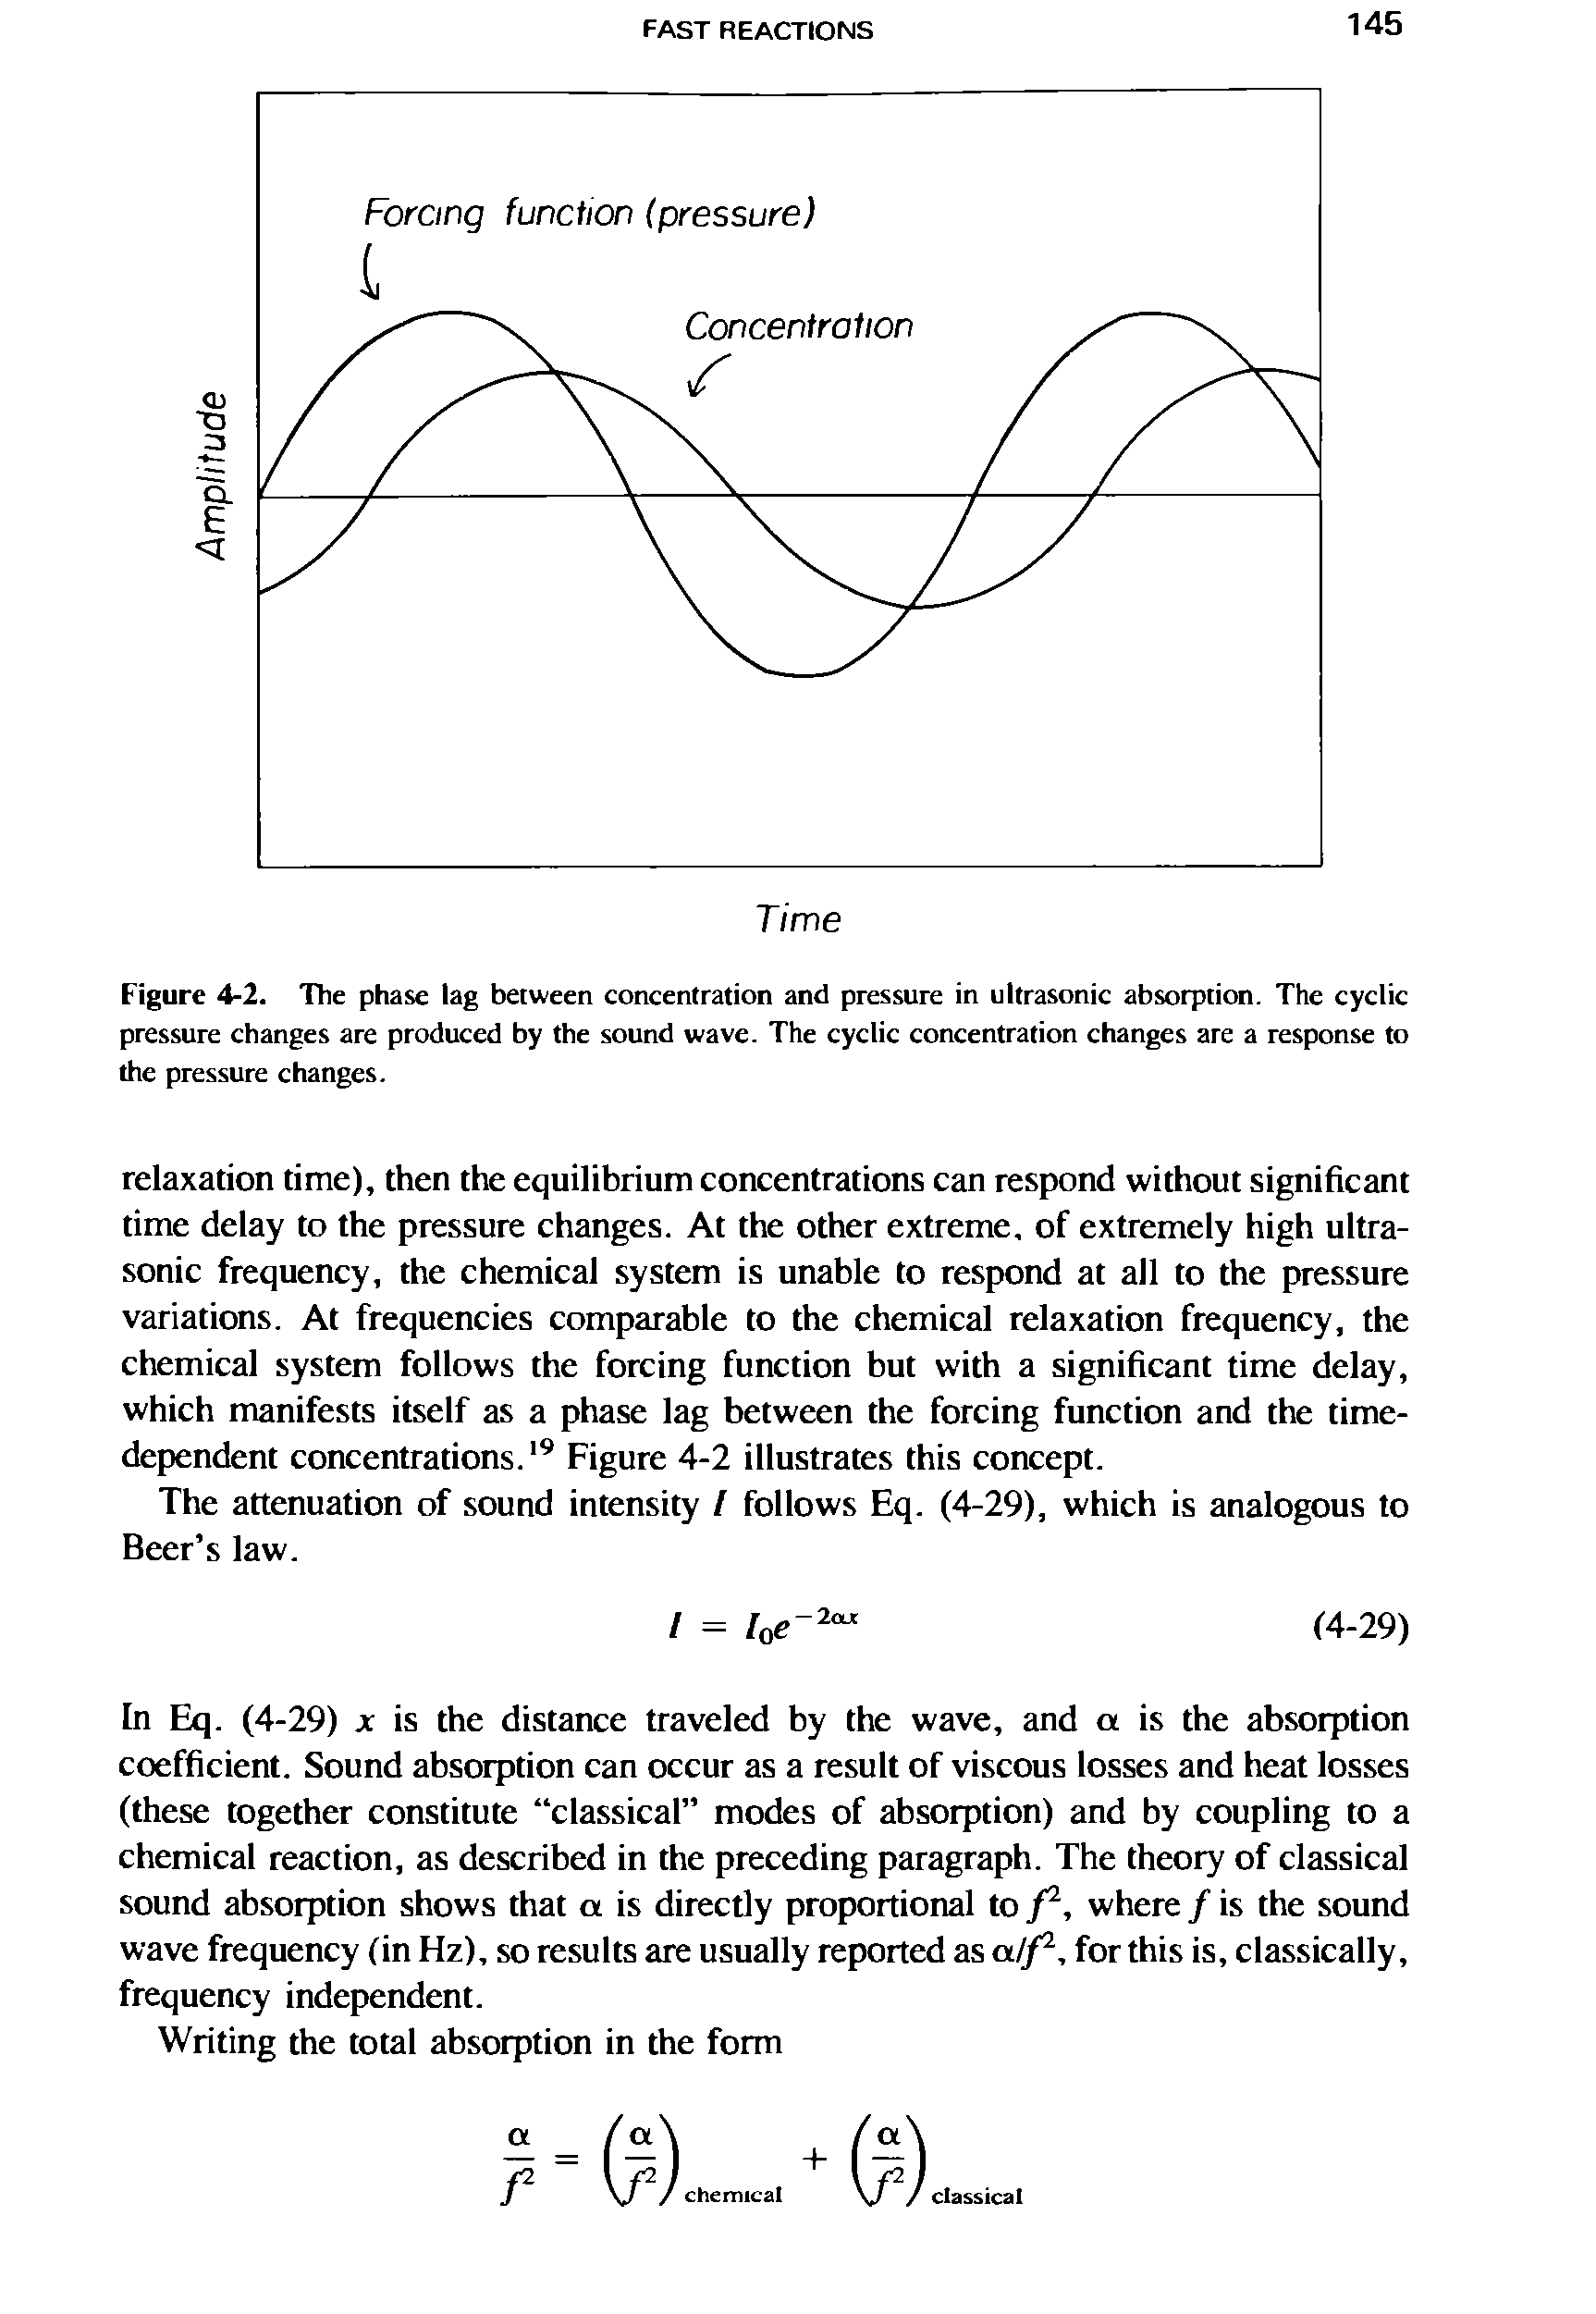 Figure 4-2. The phase lag between concentration and pressure in ultrasonic absorption. The cyclic pressure changes are produced by the sound wave. The cyclic concentration changes are a response to the pressure changes.